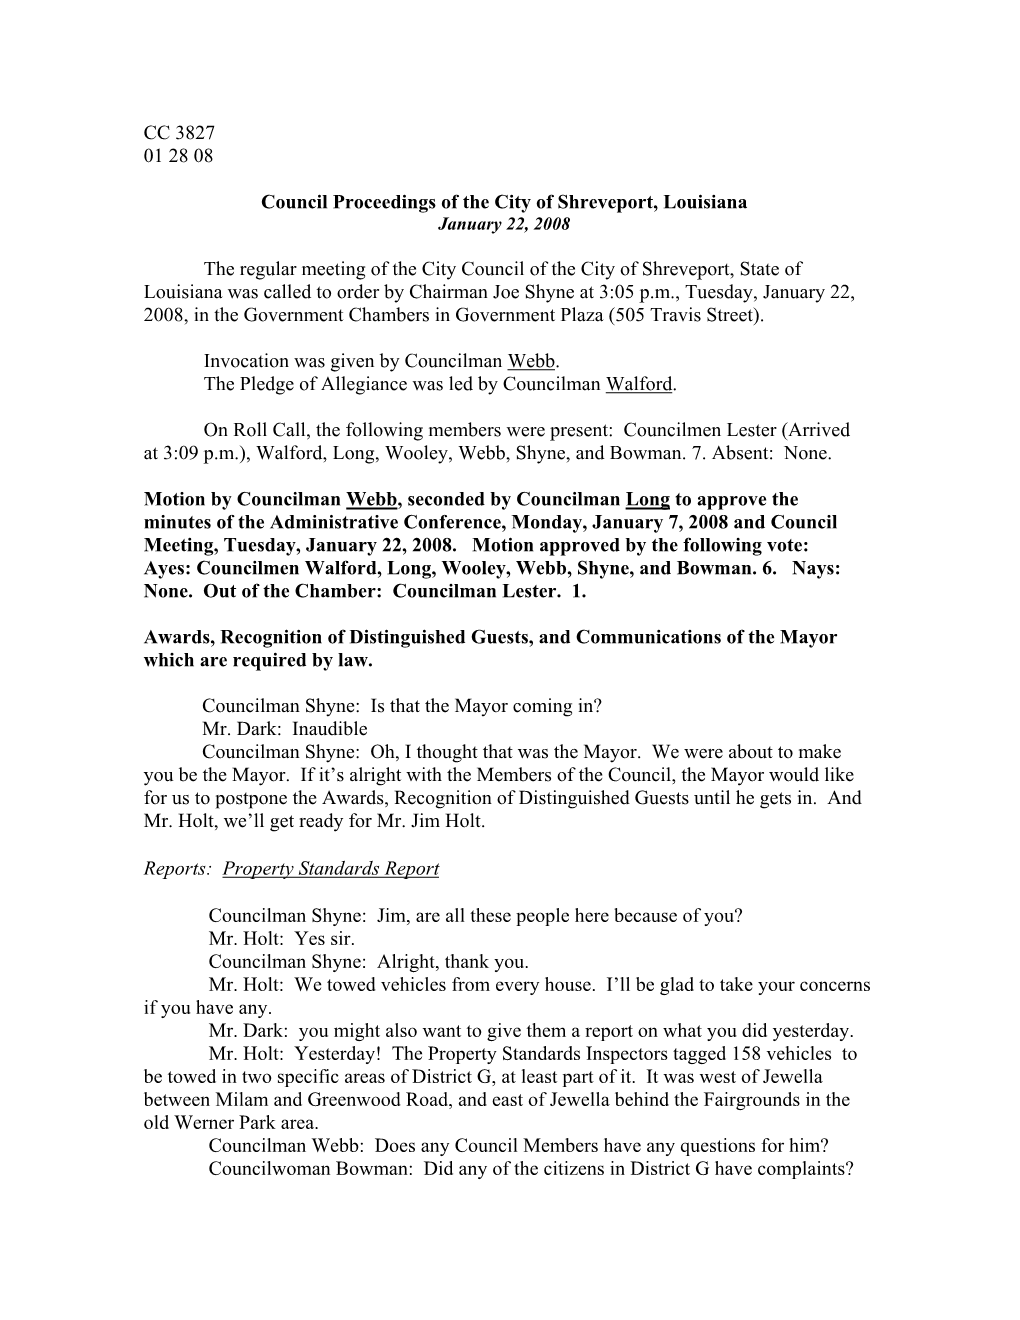 CC 3827 01 28 08 Council Proceedings of the City Of